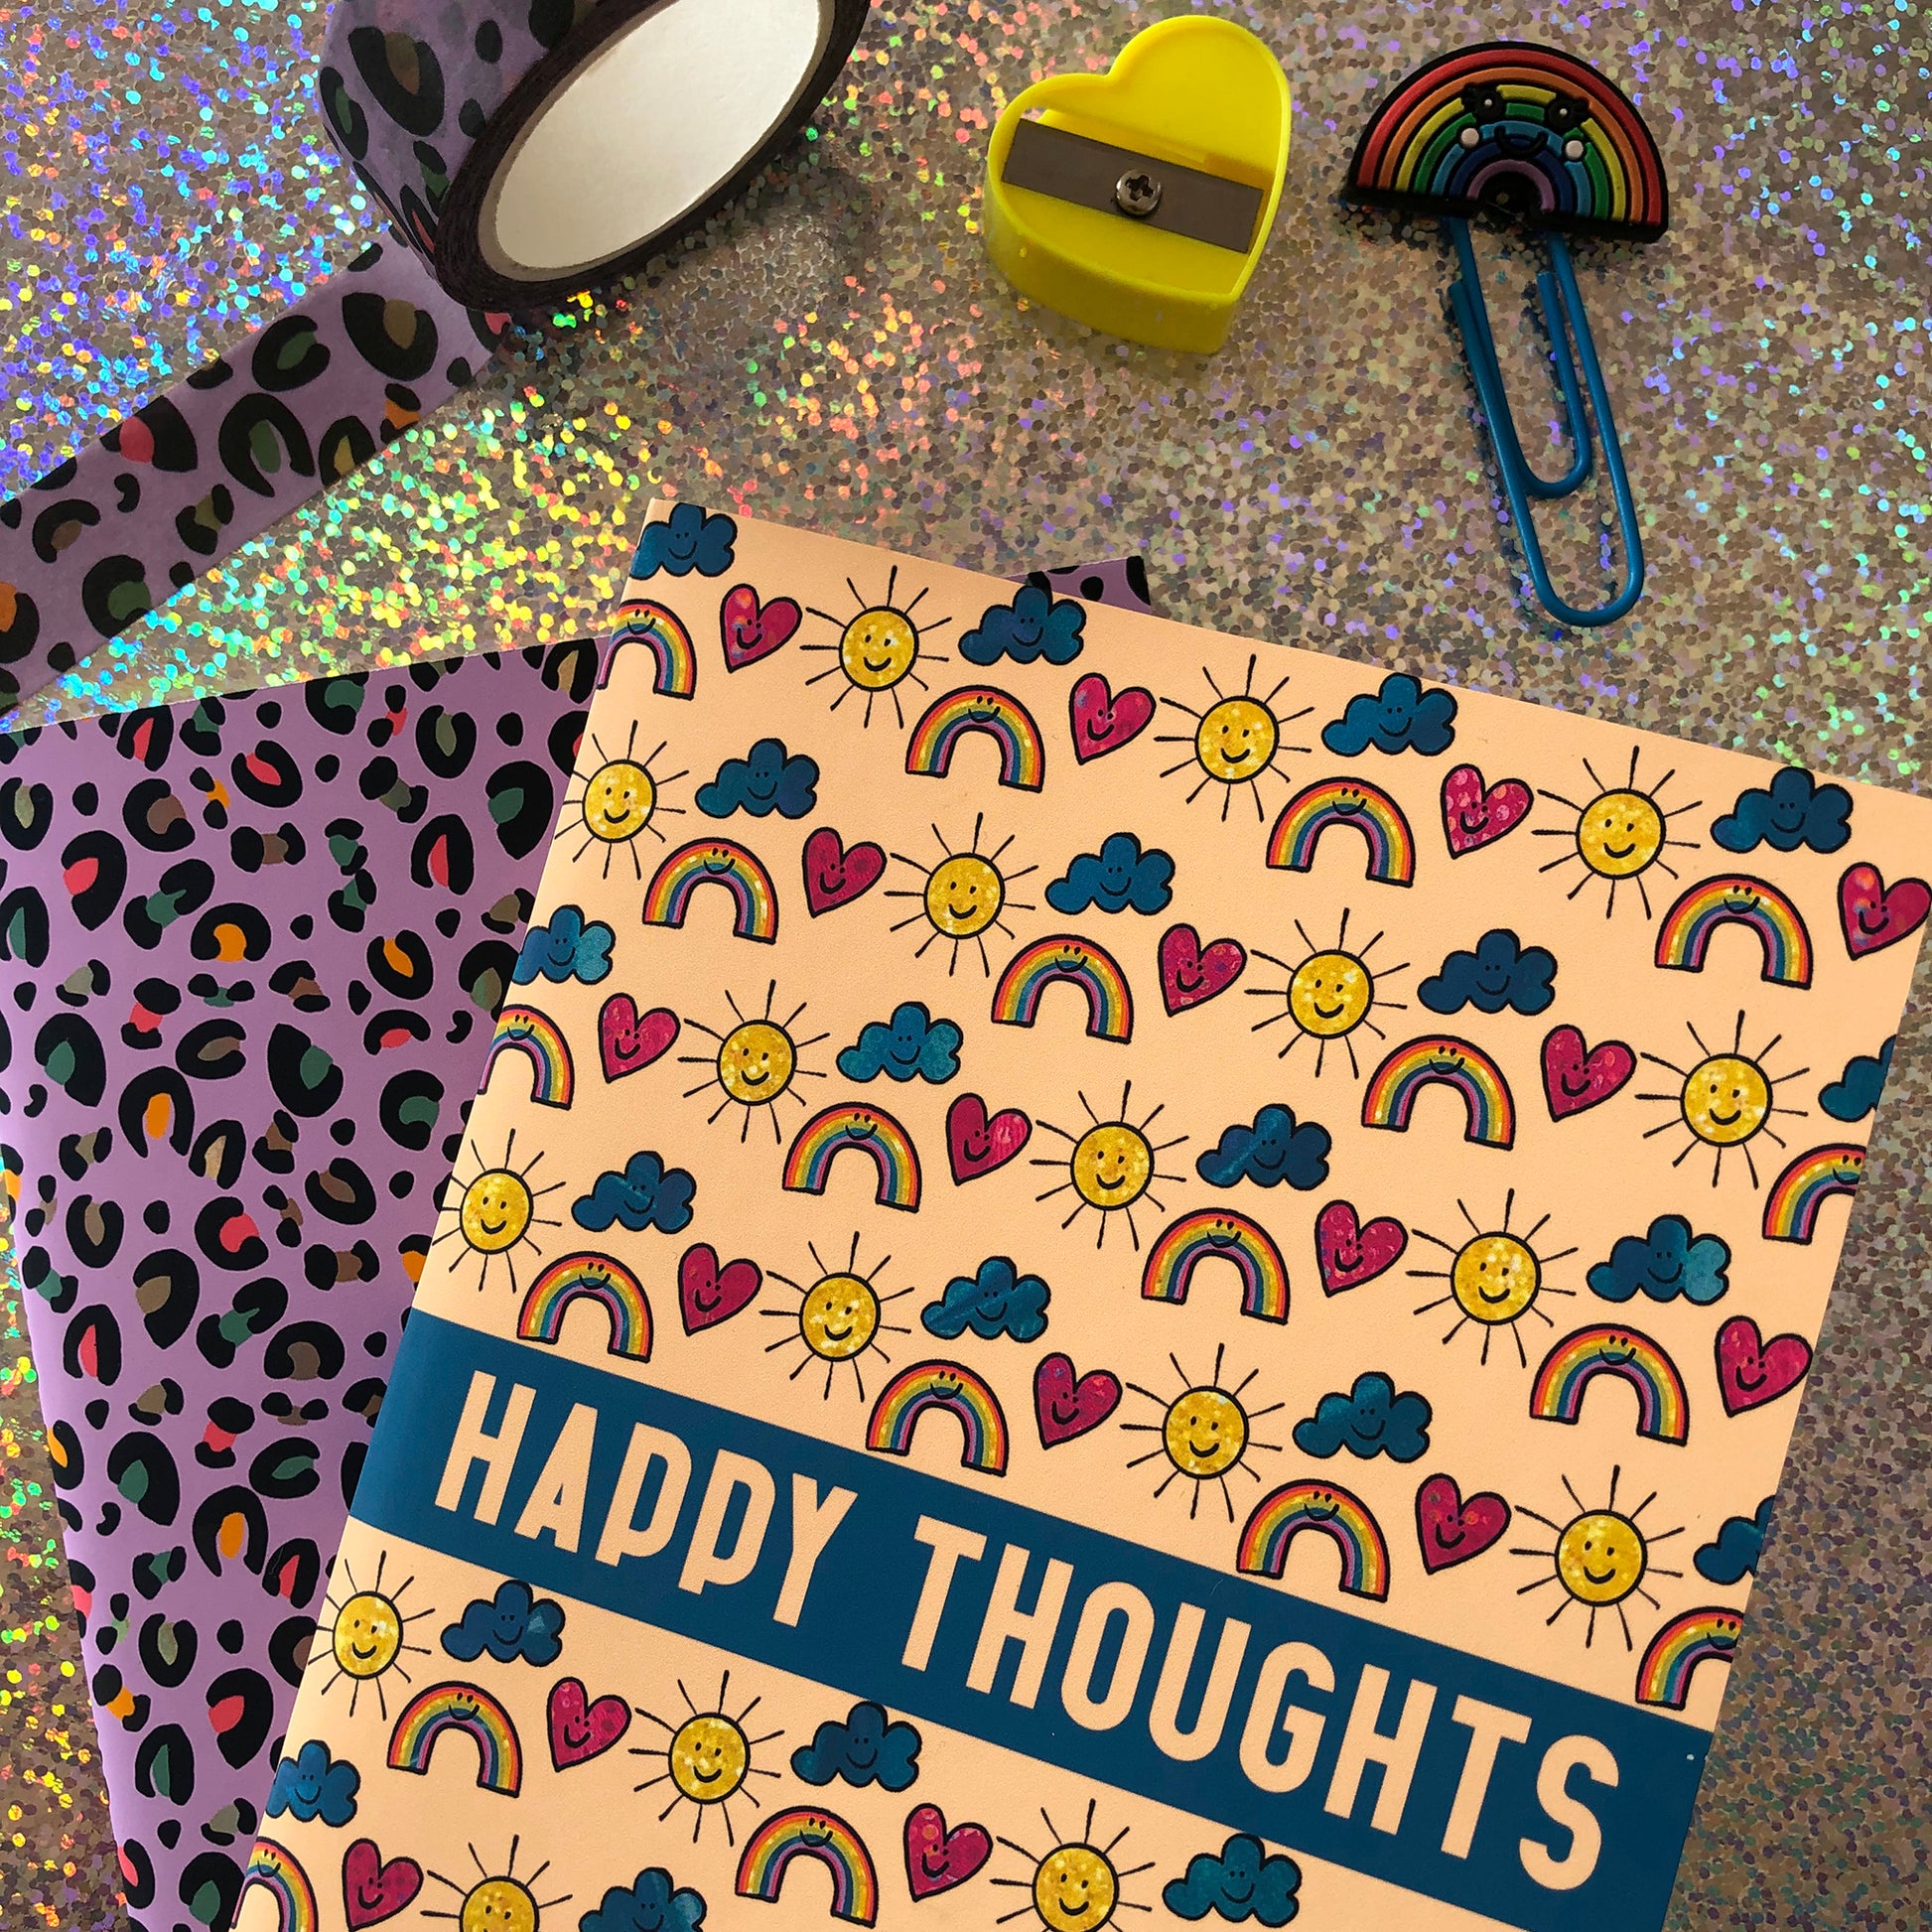 Image shows a patterned notebook with illustrations of suns, clouds, hearts and rainbows with smiling faces. The notebook says Happy thoughts on the cover